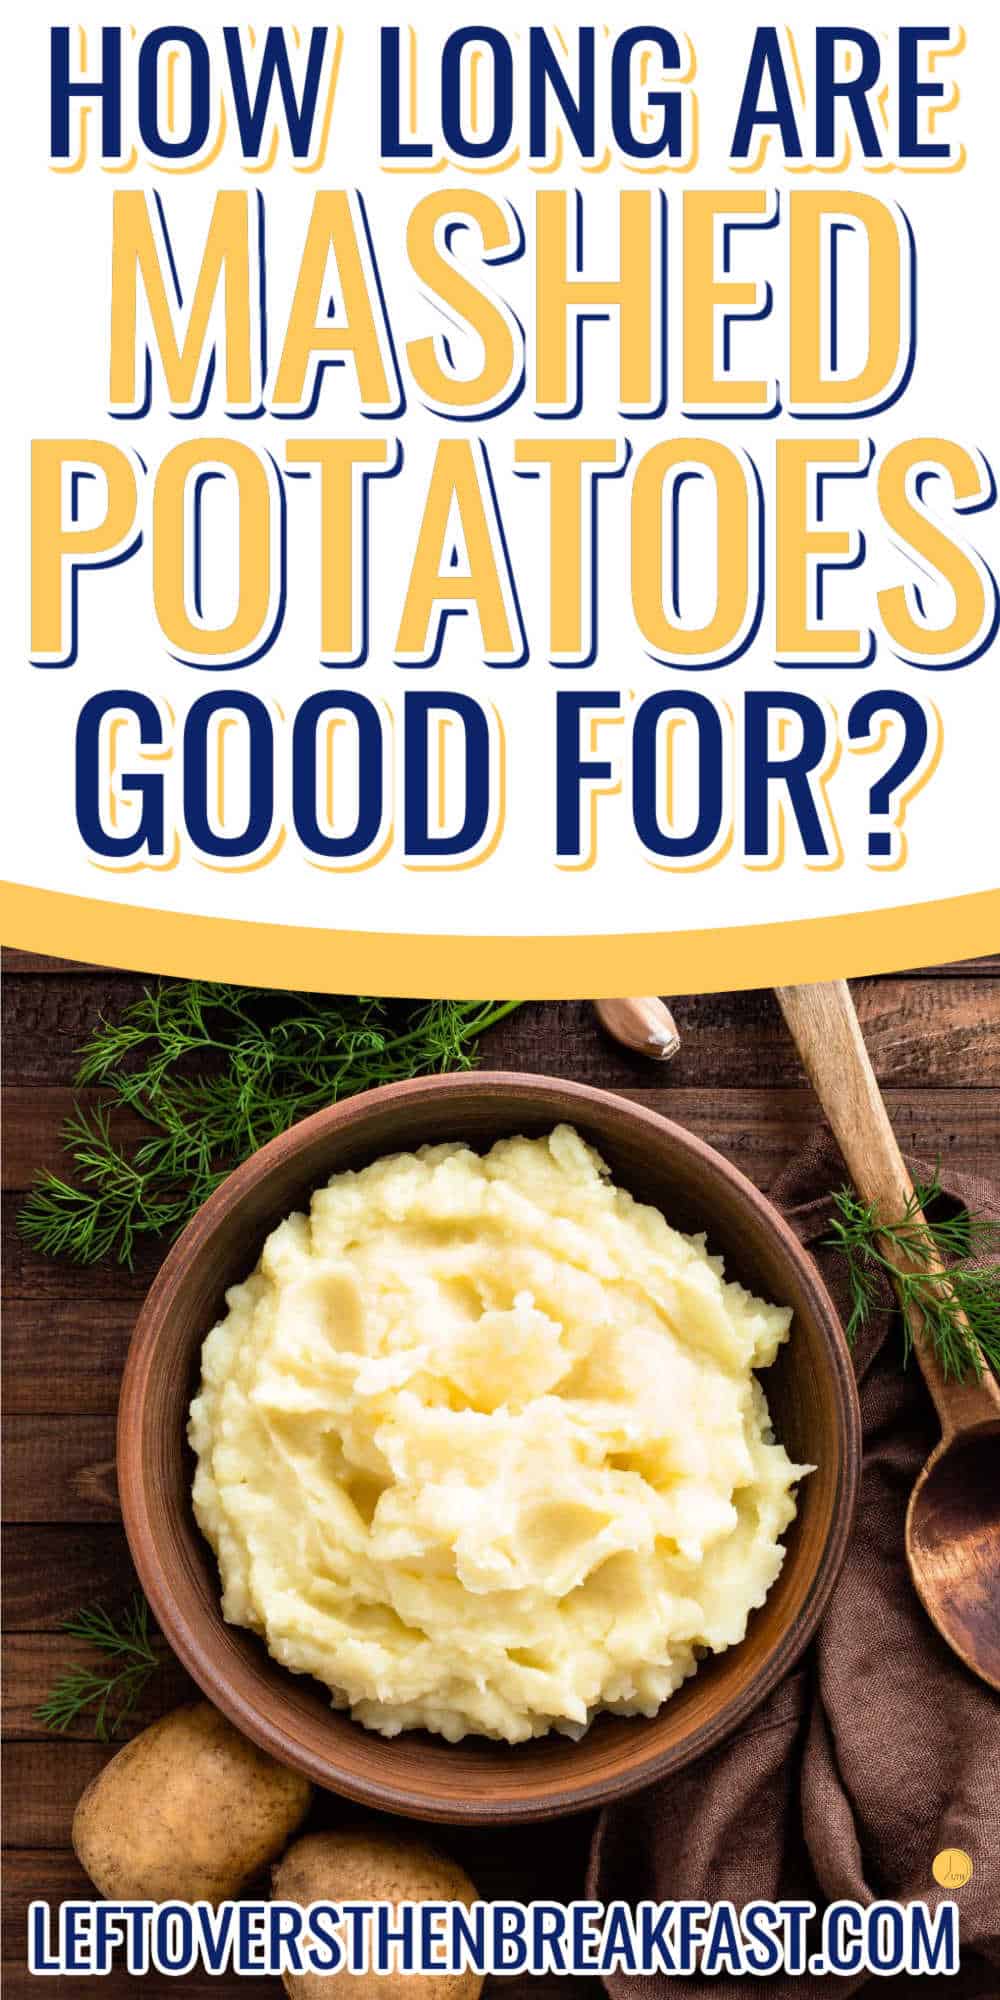 brown bowl of mashed potatoes with text "how long are they good for?"